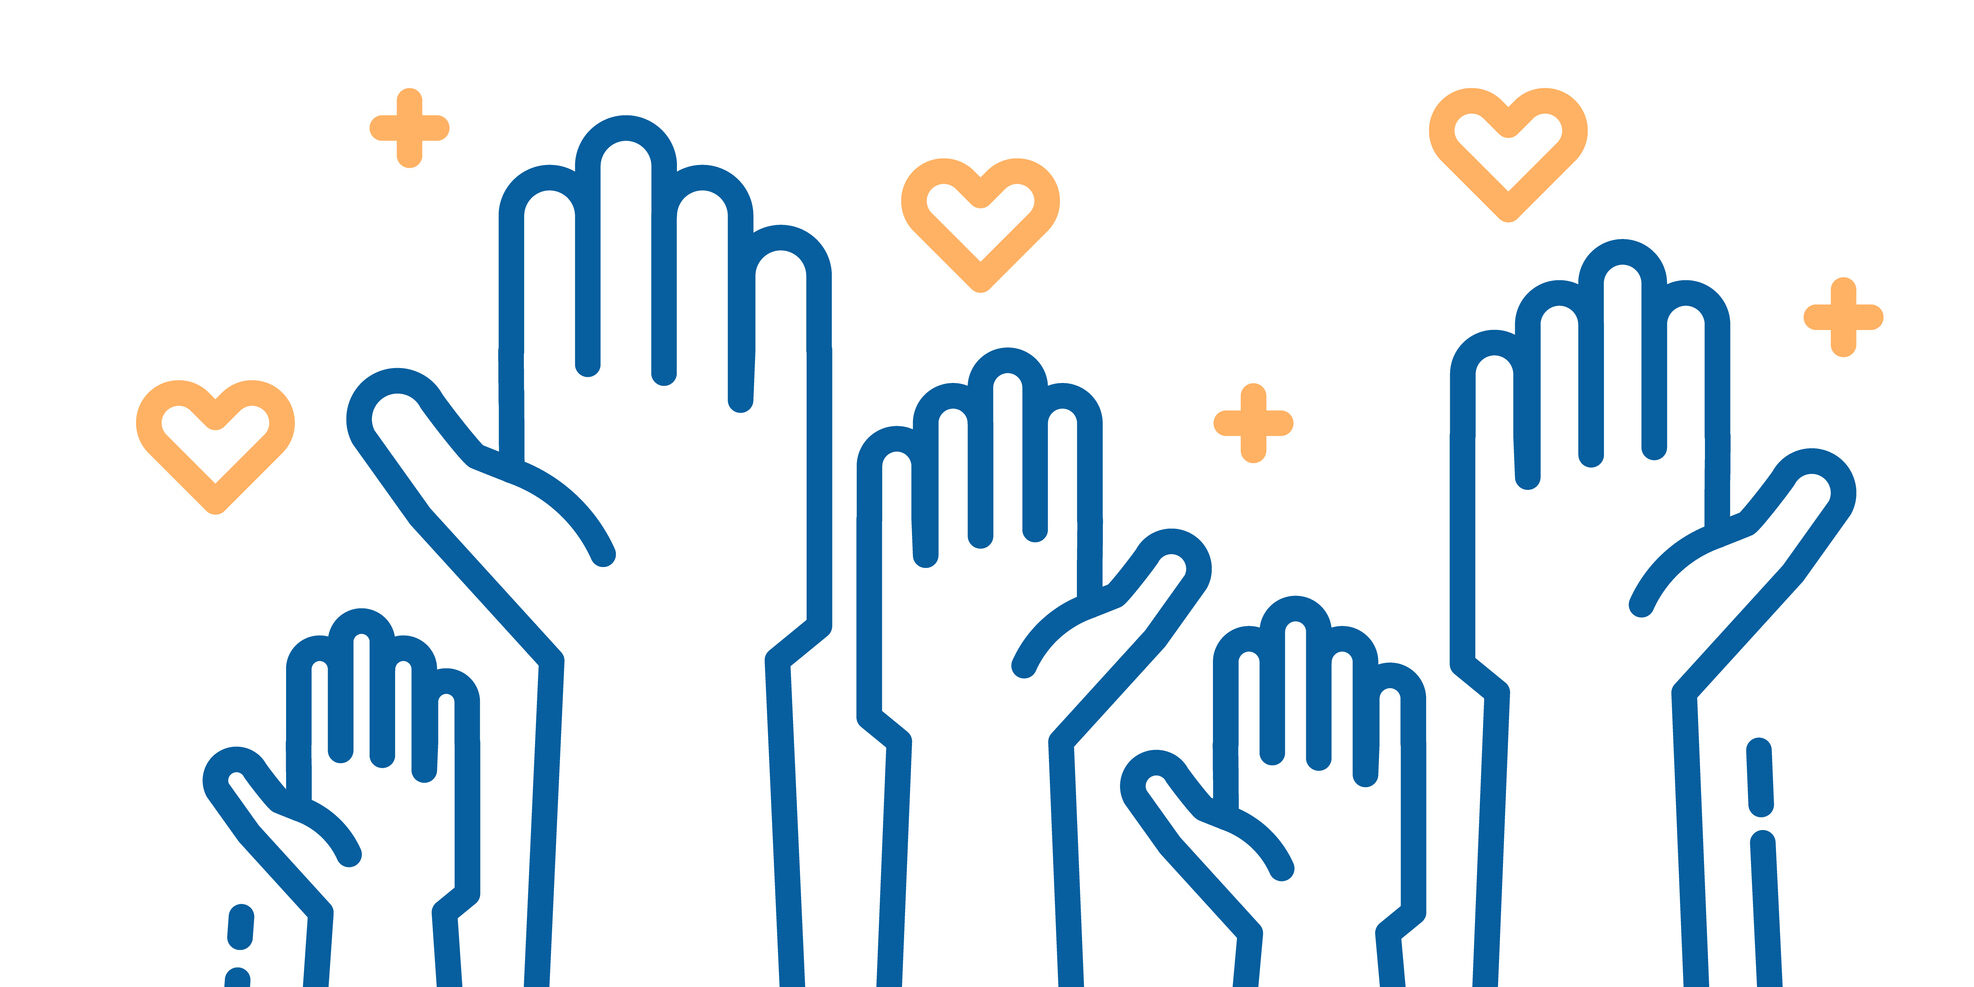 Raised helping hands. Vector thin line icon illustrations with a crowd of people ready and available to help and contribute.